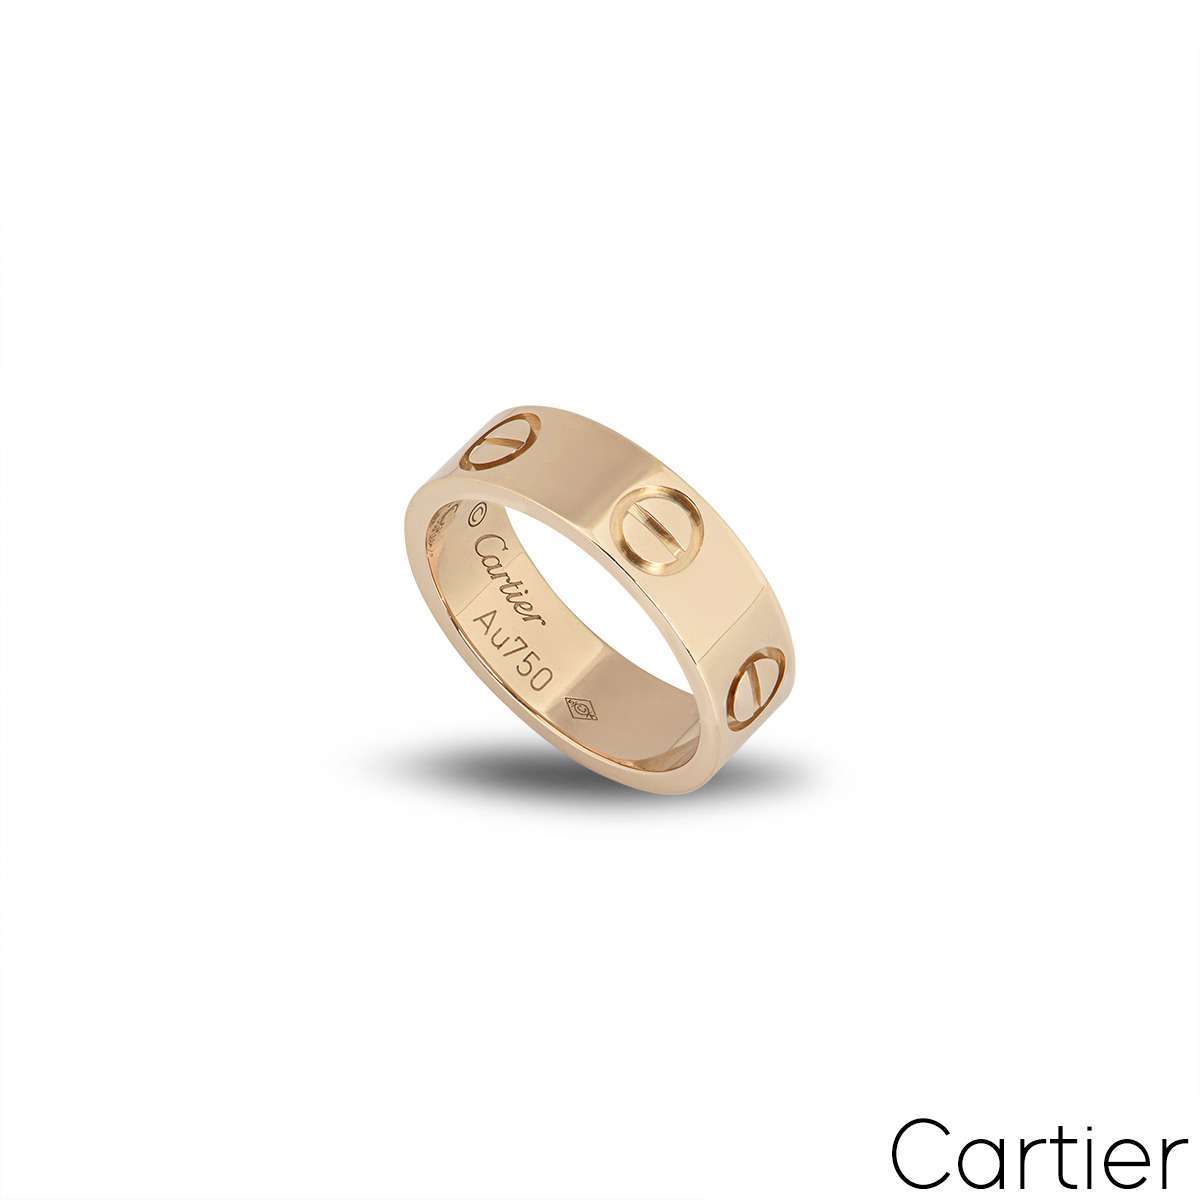 cartier ring price list 2014